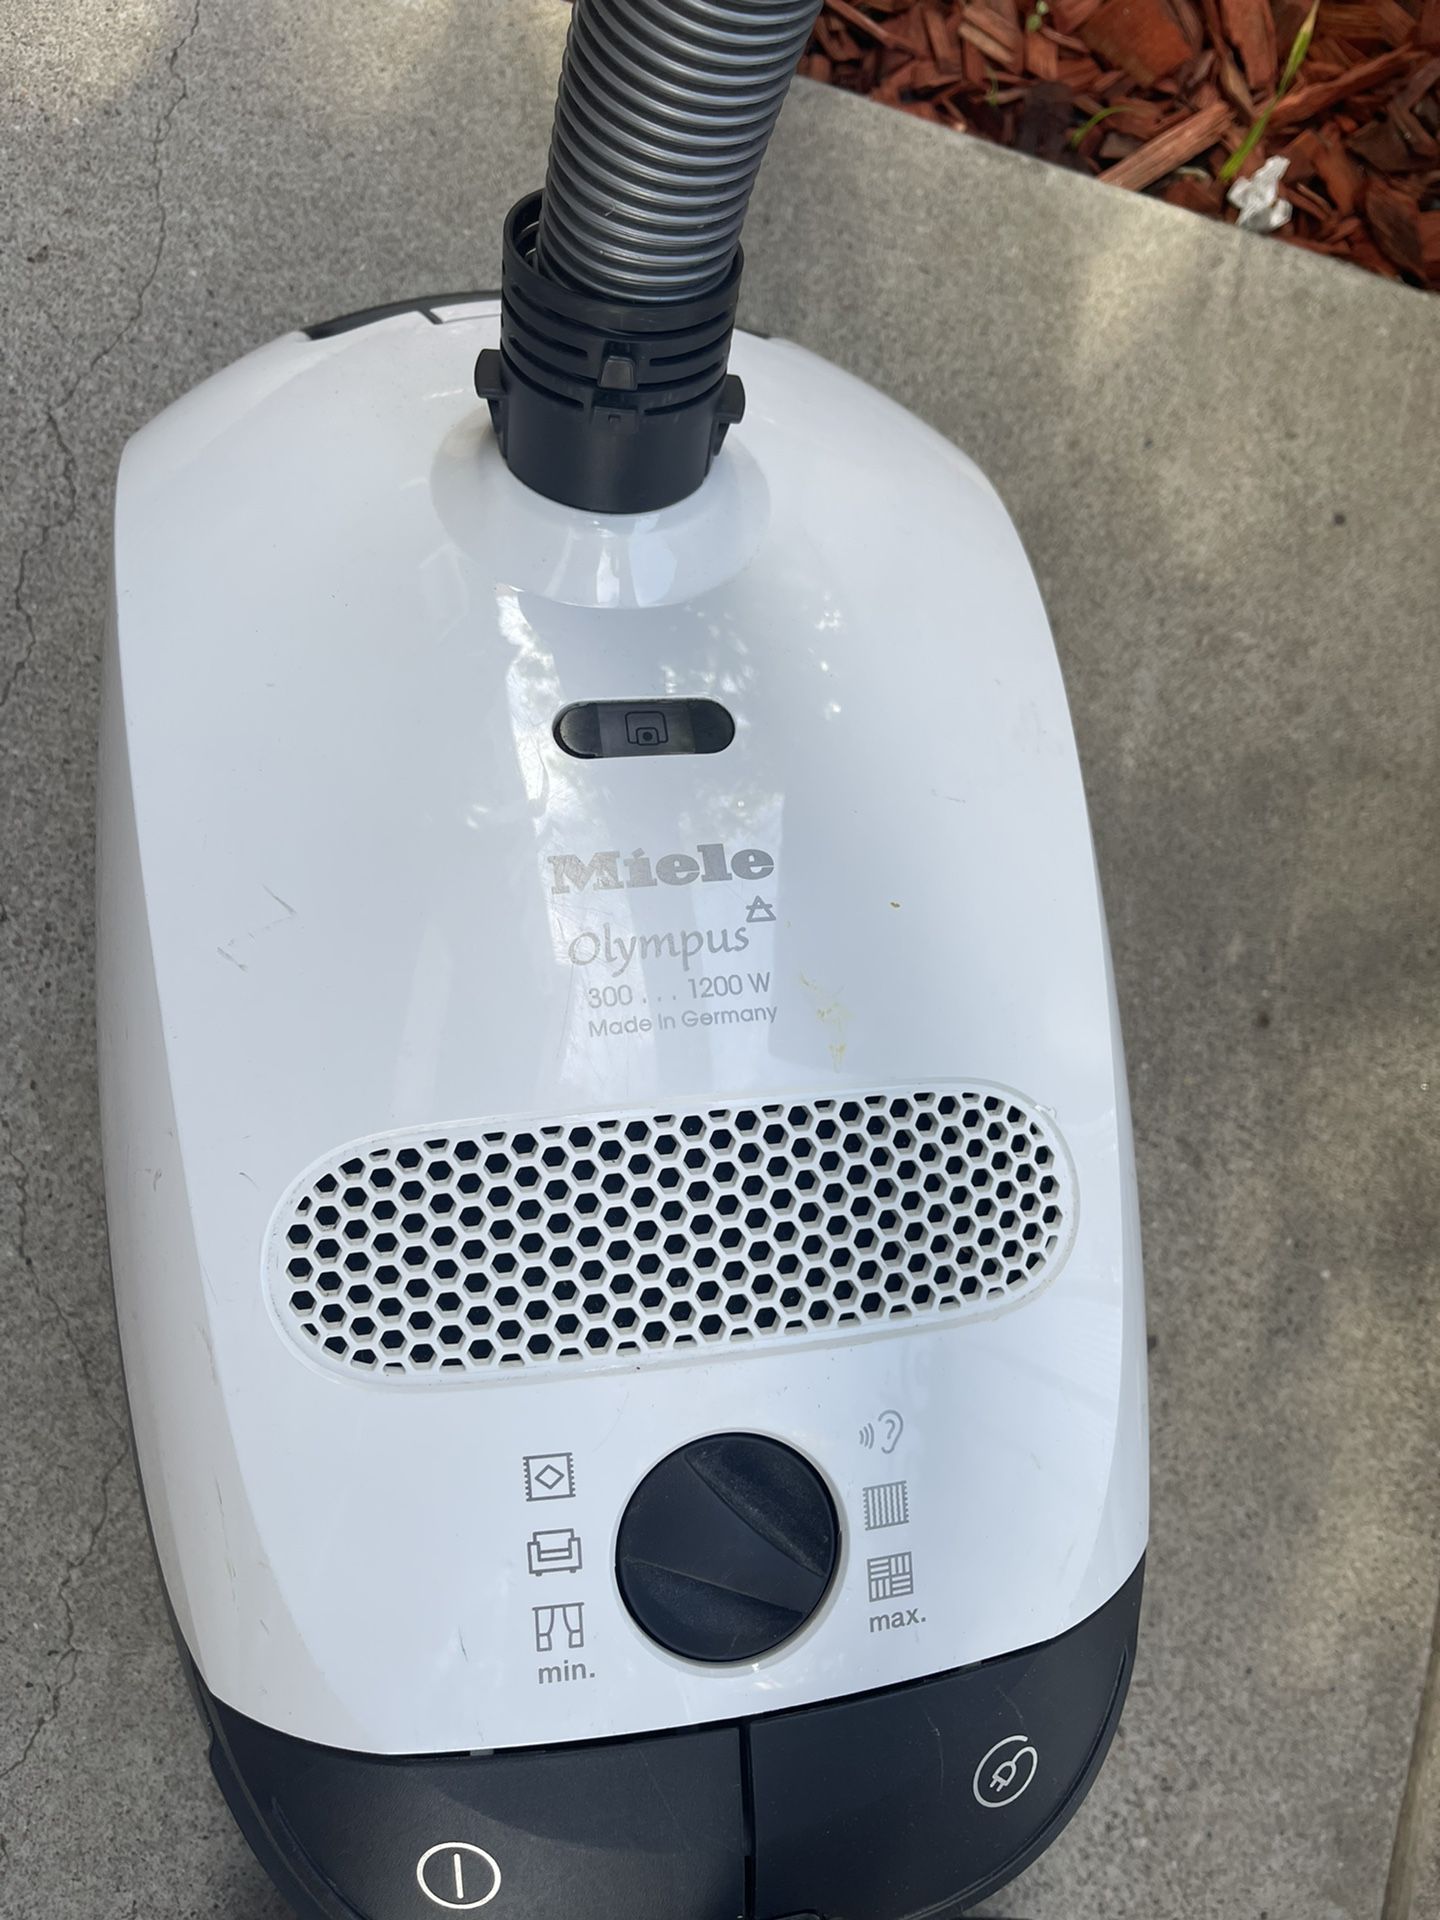 Miele Olympus Canister Vacuum Cleaner is lightweight and has an air clean filter. It has a dusting brush, upholstery tool & crevice nozzle. Has a 29.5